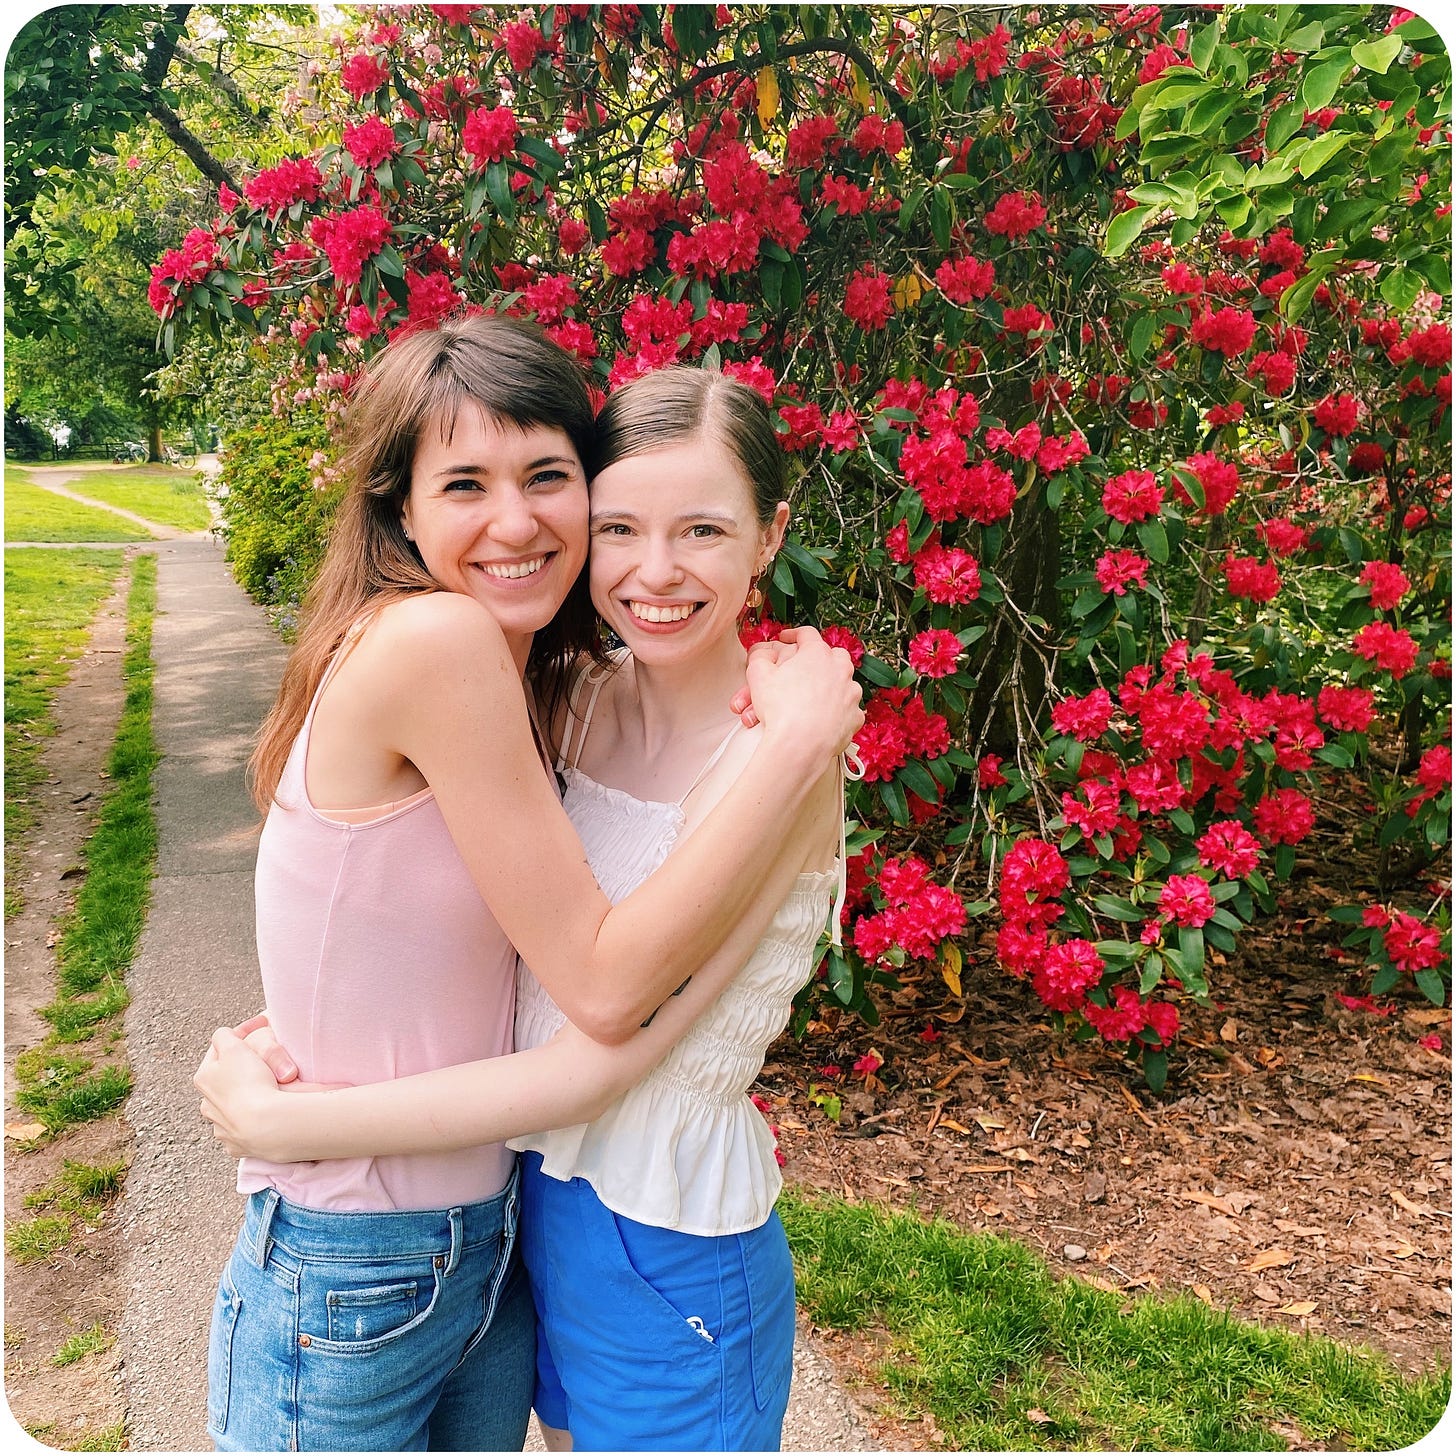 The illustrator and her pen pal embracing, a red rhododendron backdropping the two.